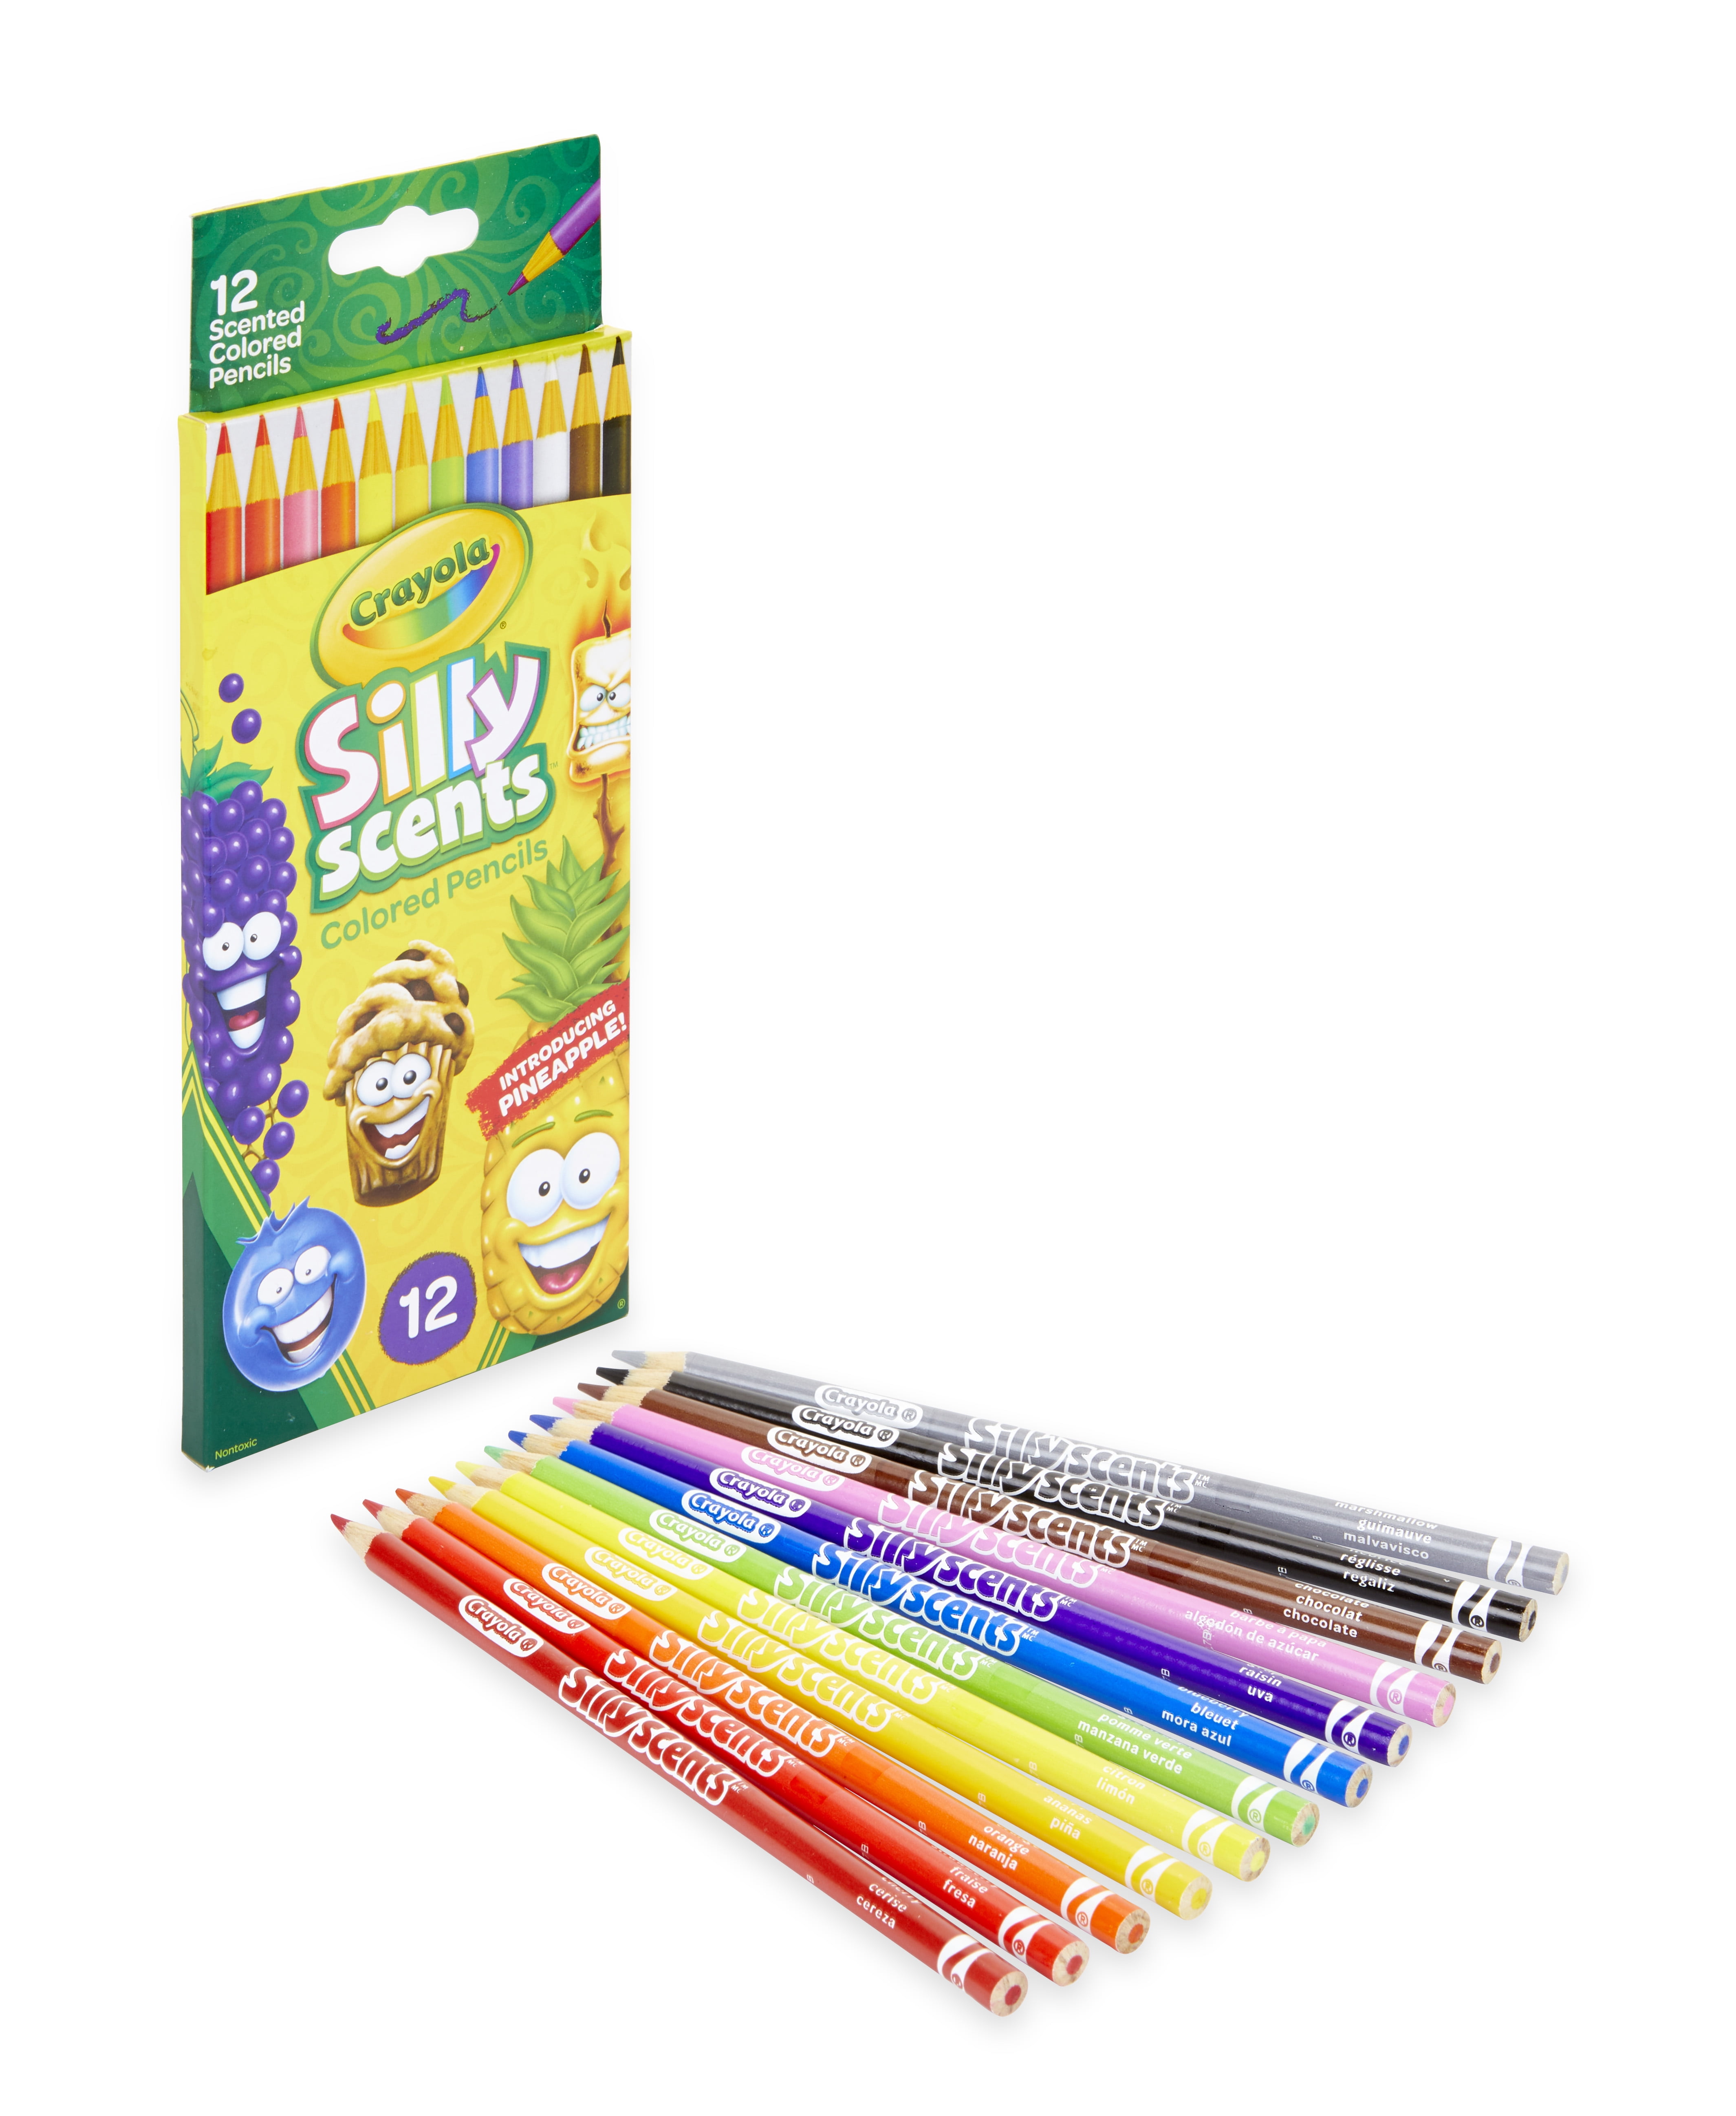 Crayola Silly Scents Twistables Colored Pencils, 12 Count, Ages 3 & Up  (68-7402)